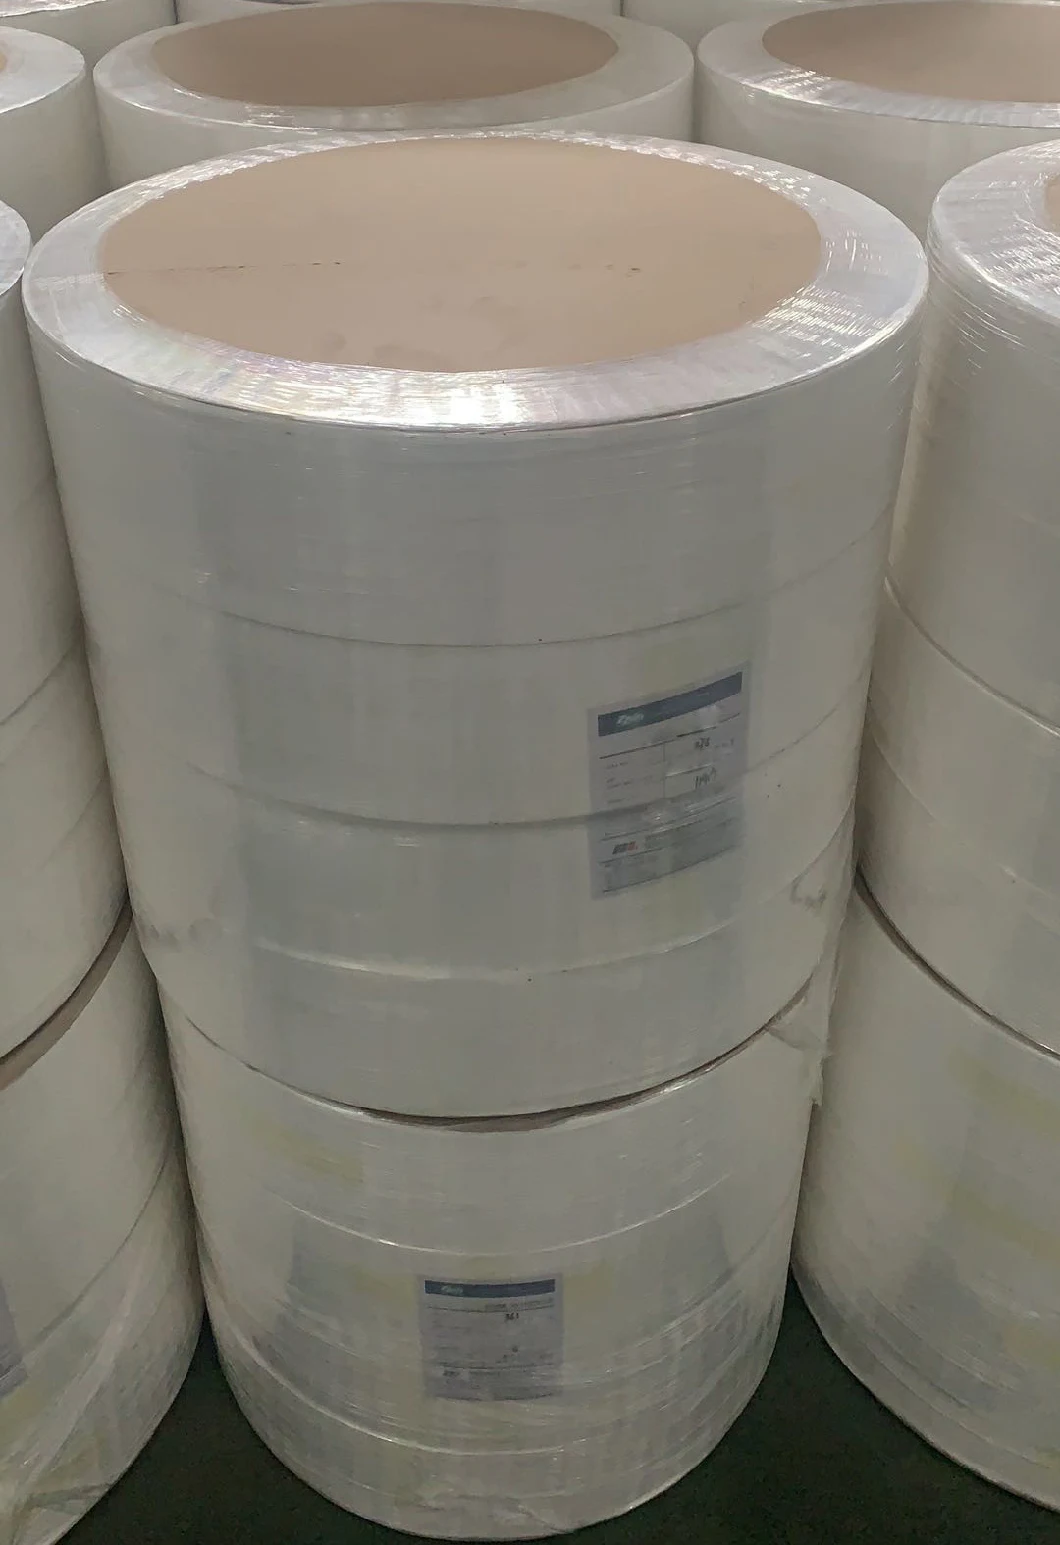 Raw Material Jumbo Roll Virgin Fluff Wood Pulp for Diapers and Sanitary Napkins Making